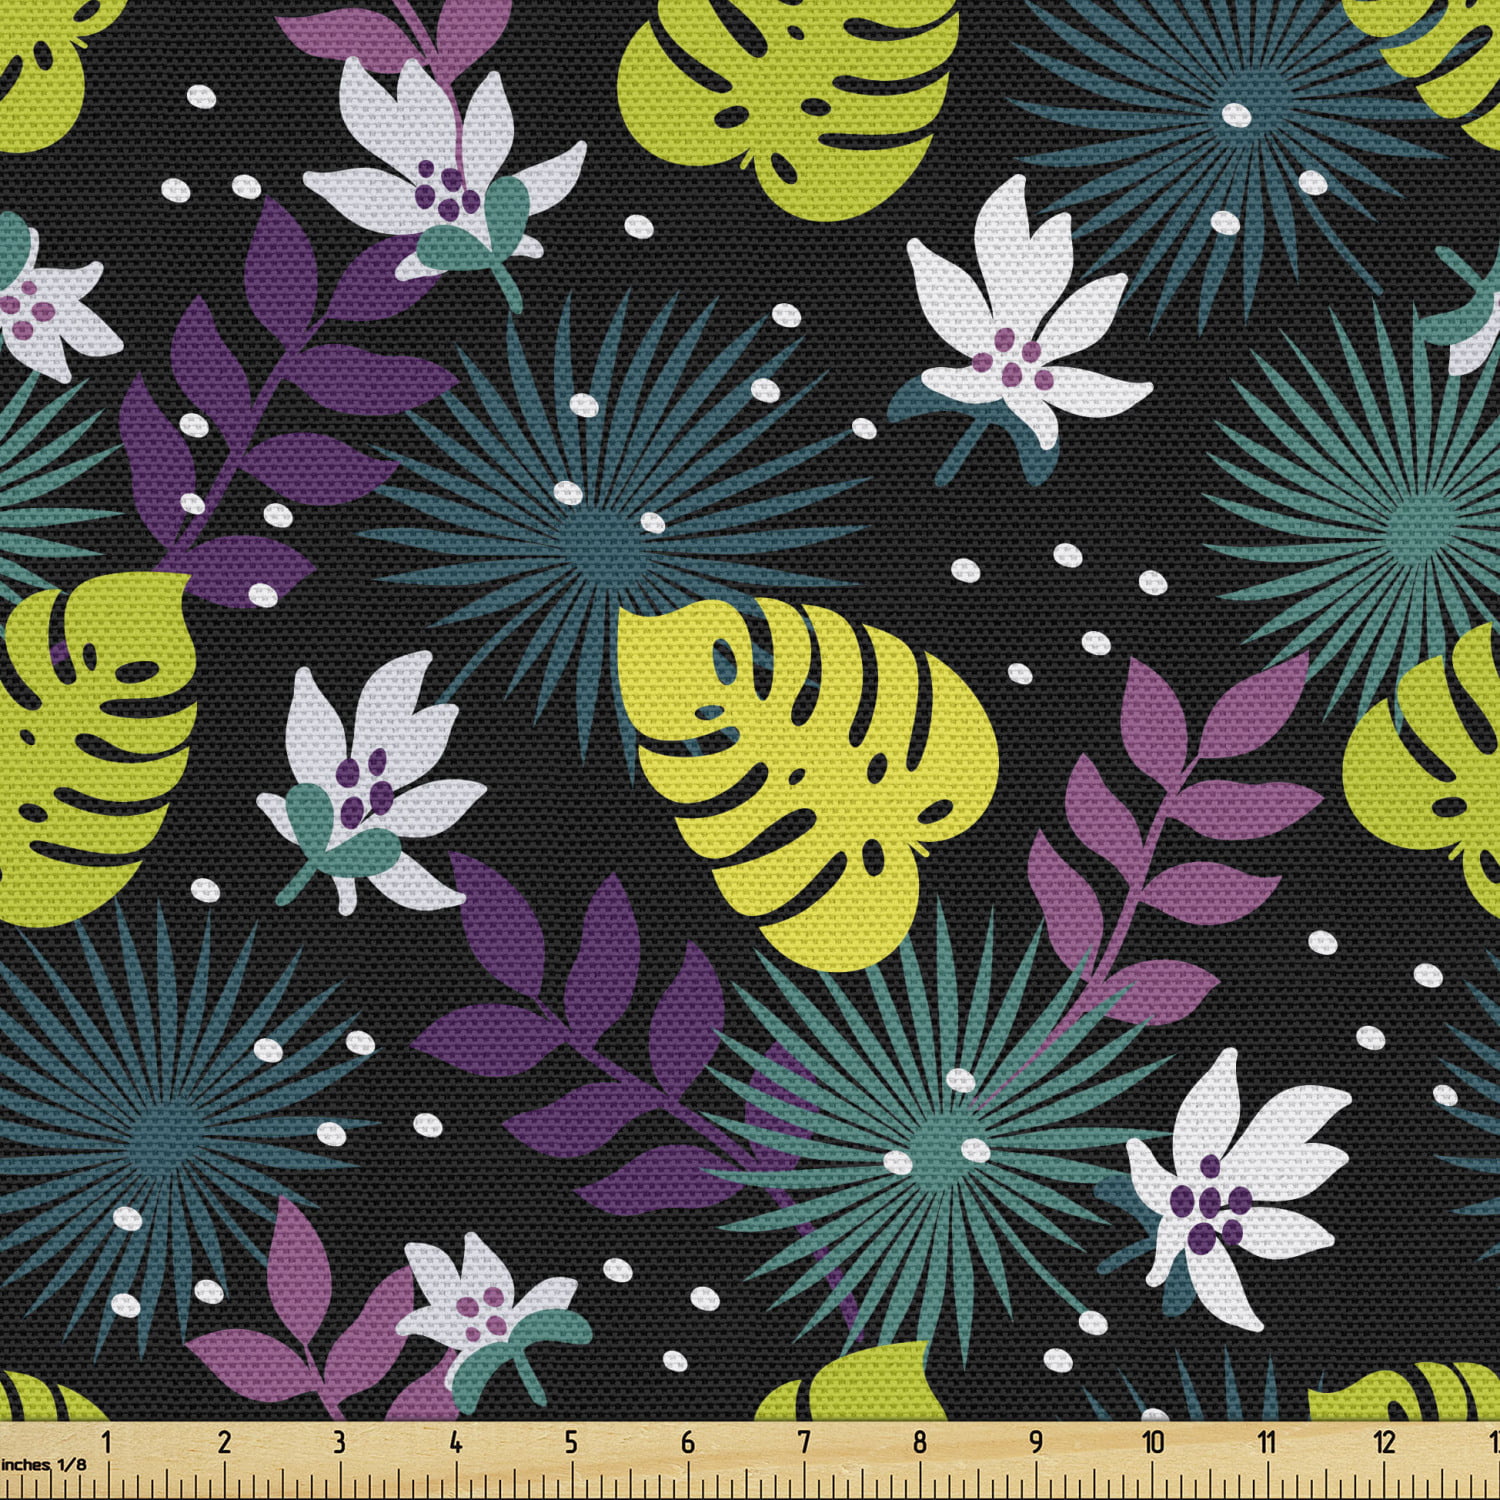 Spotted Acorns Flower Leaf Branches 100% Cotton Fabric 